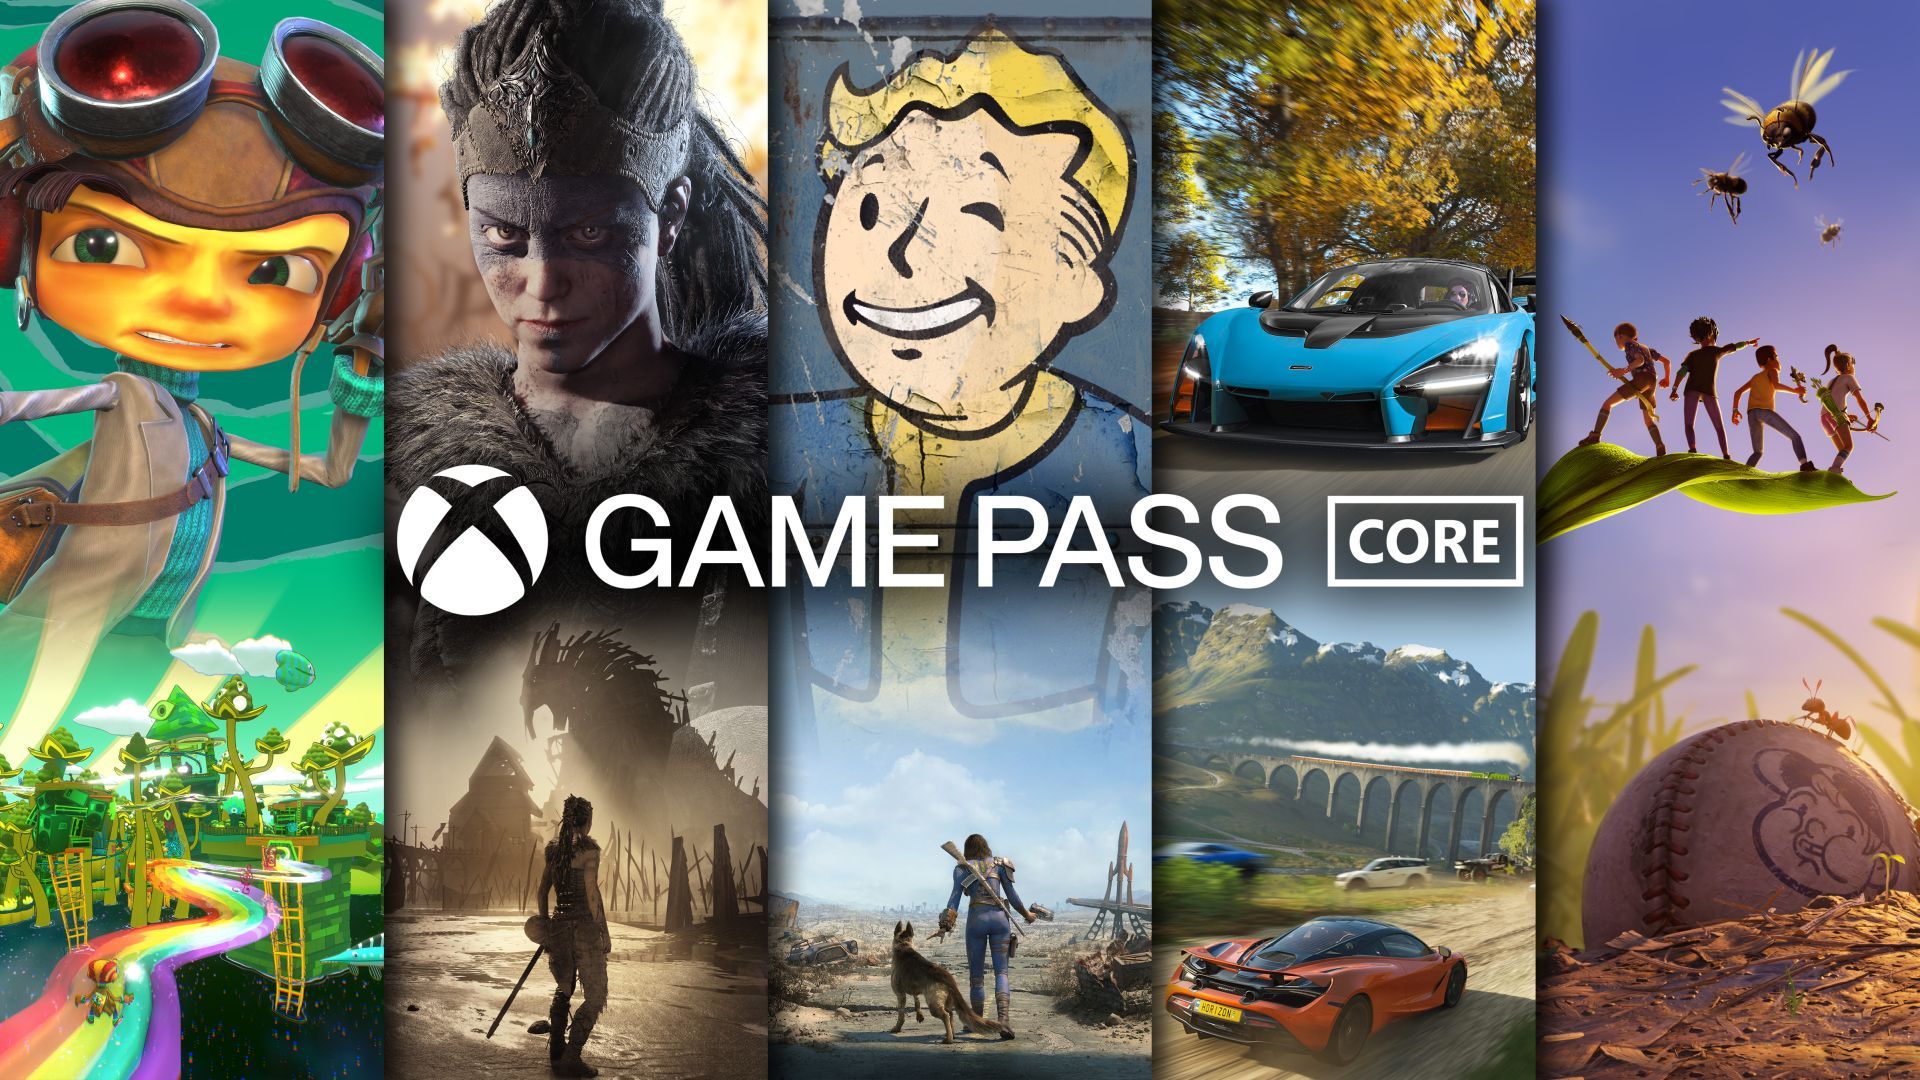 Microsoft confirms that Xbox Game Pass hurts game sales